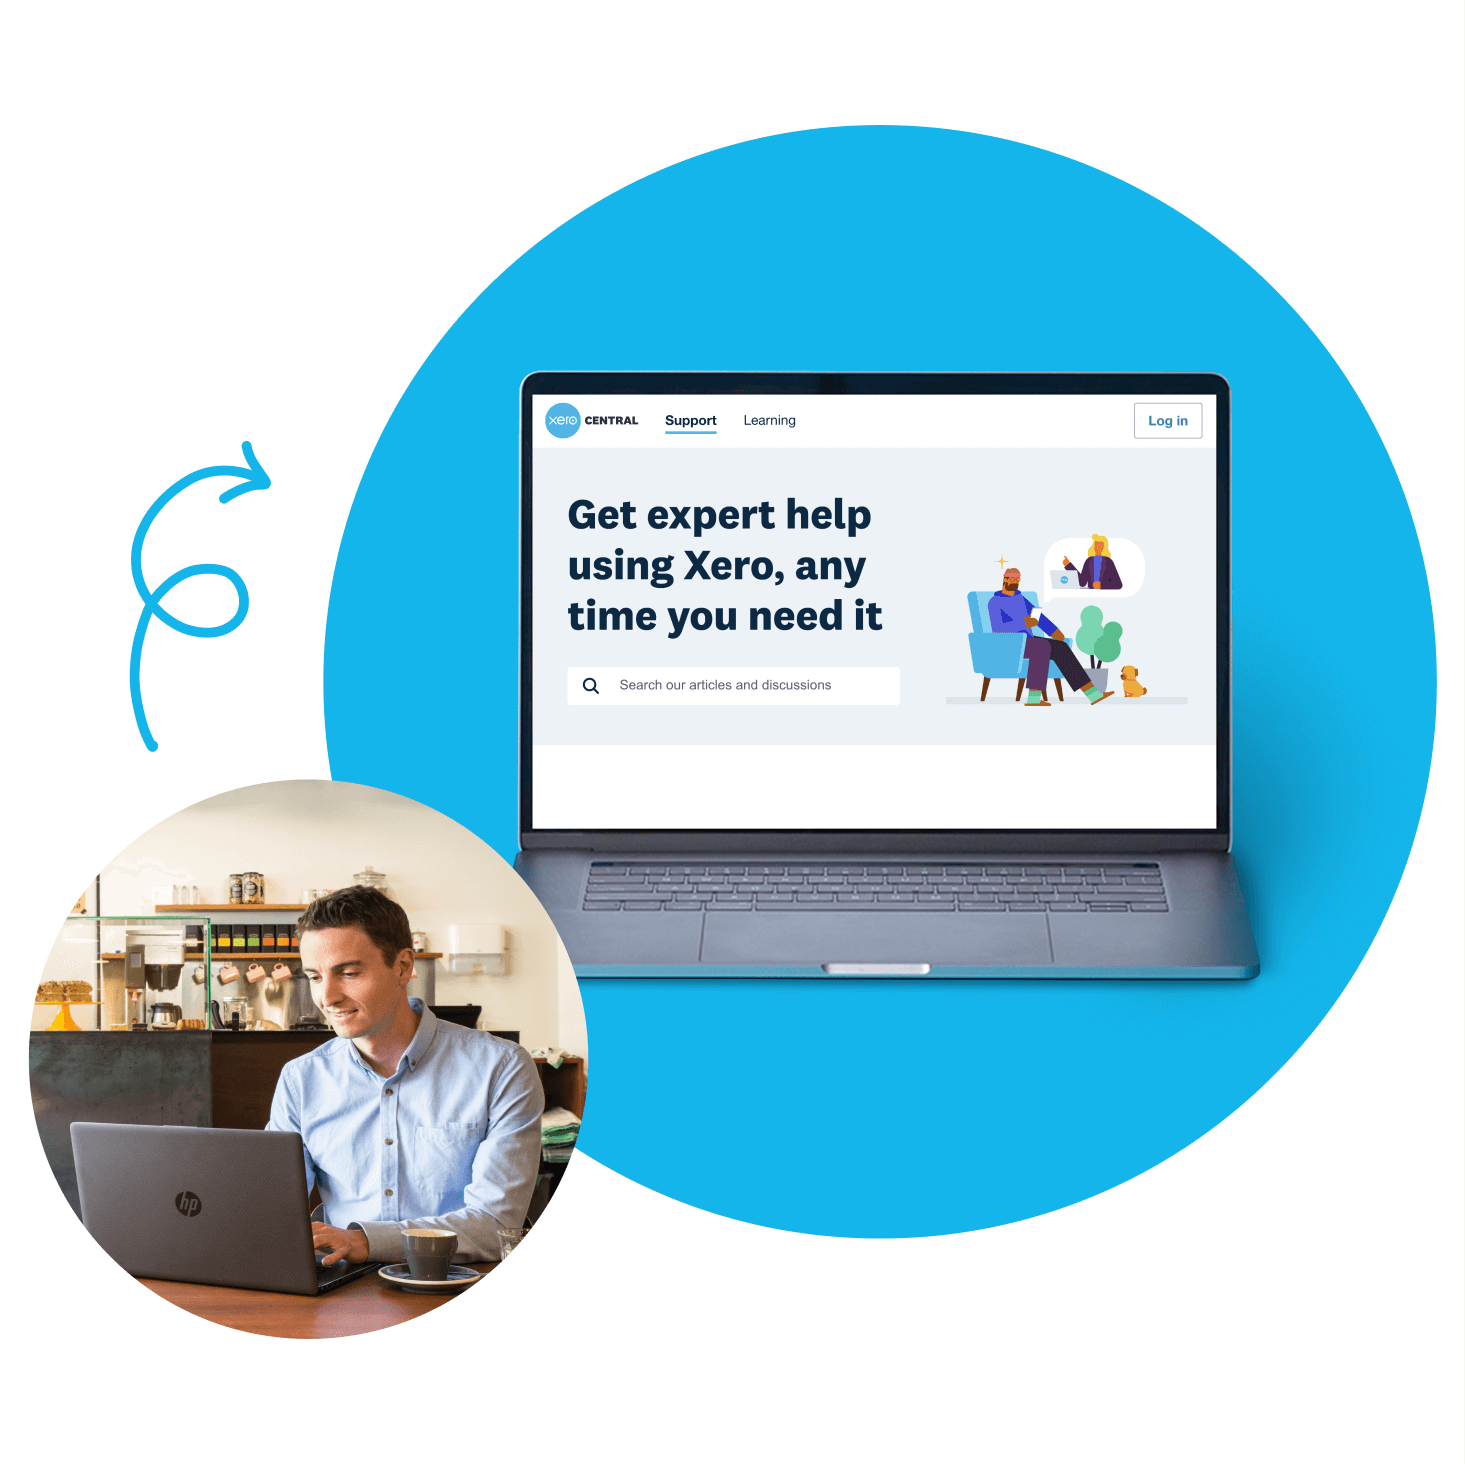 A business owner looks up information about Xero’s support pages on their laptop.